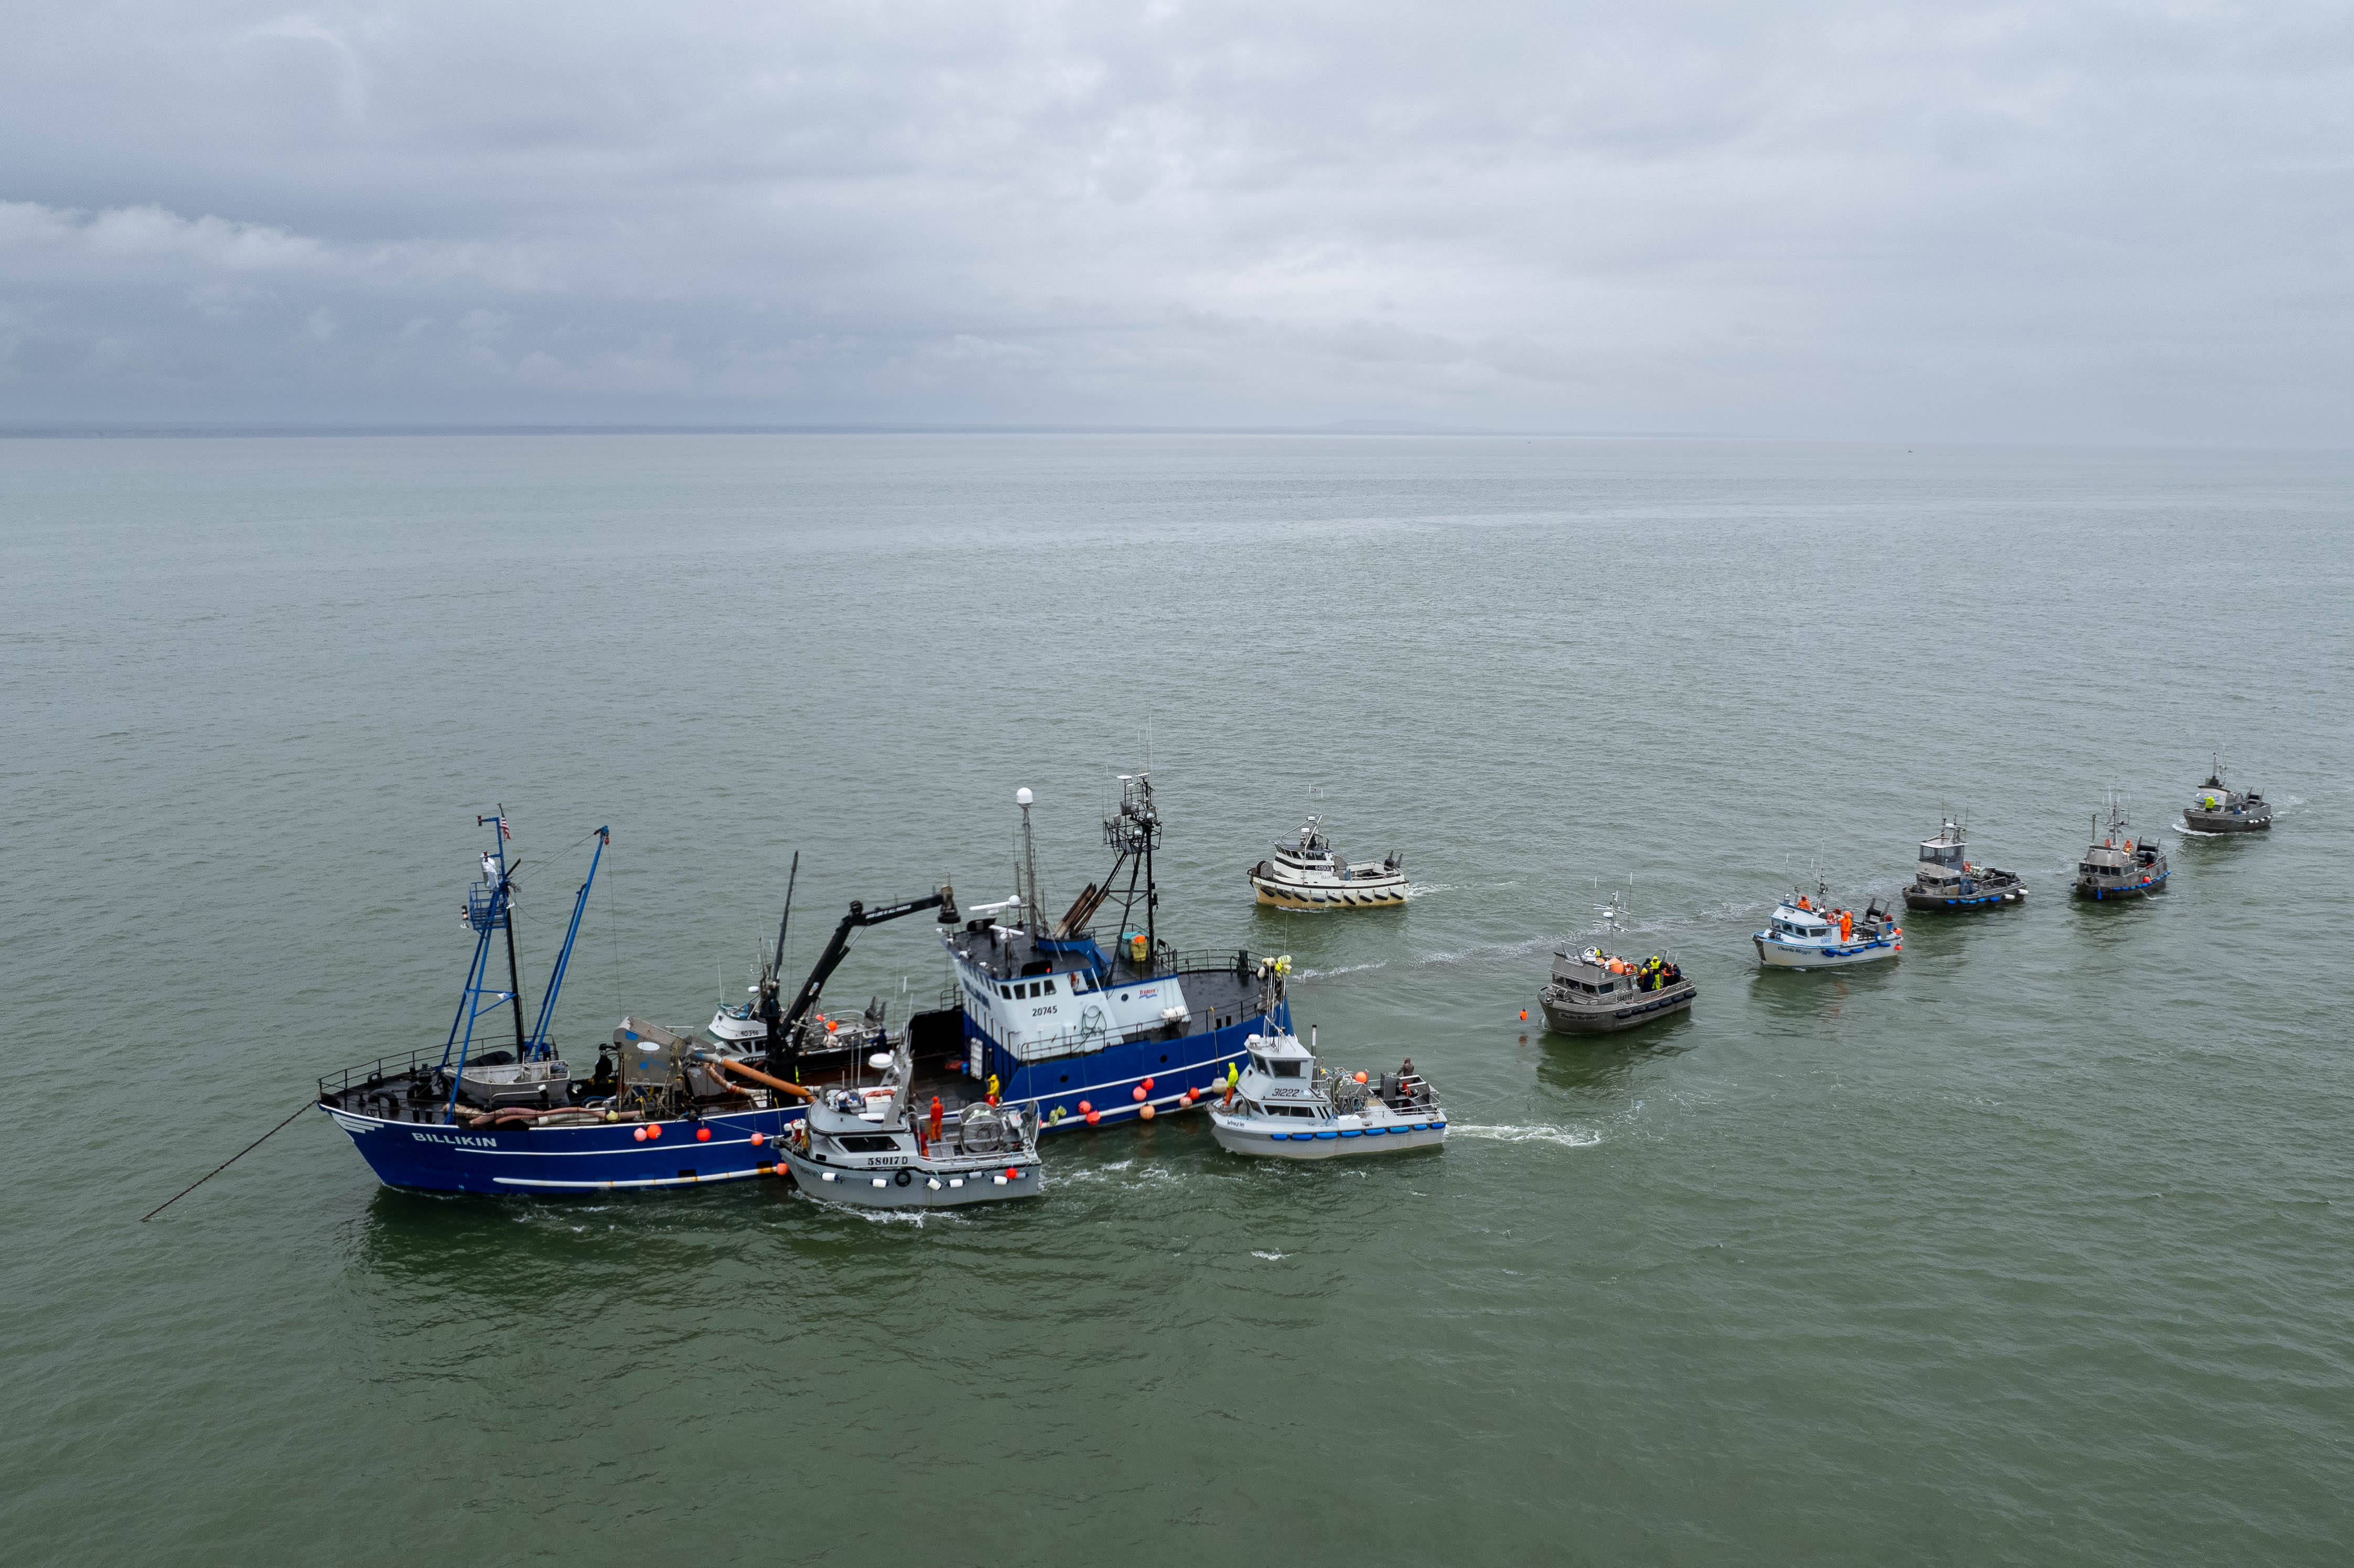 Alaska commercial fishing industry goes 1 year without a fatality -  Anchorage Daily News